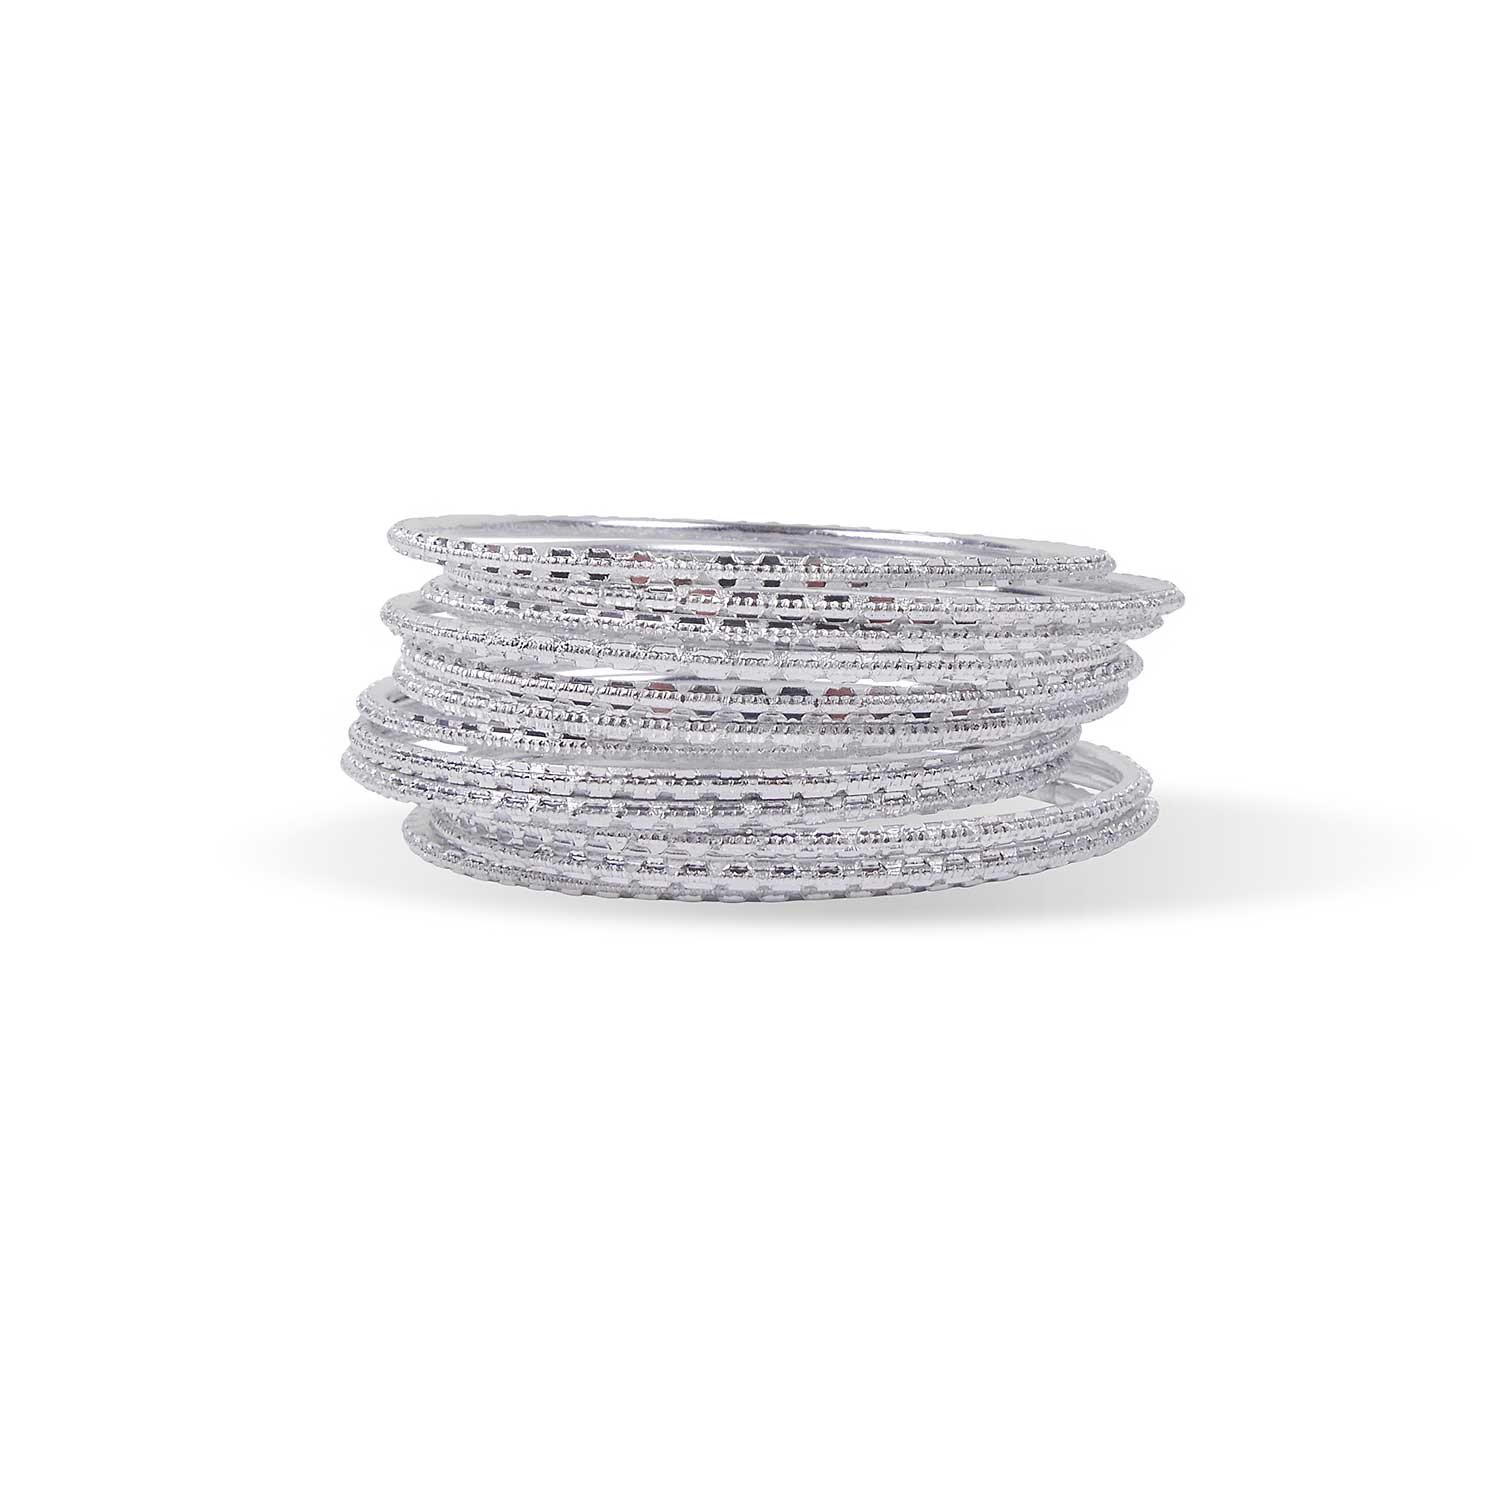 Textured Silver Bangles